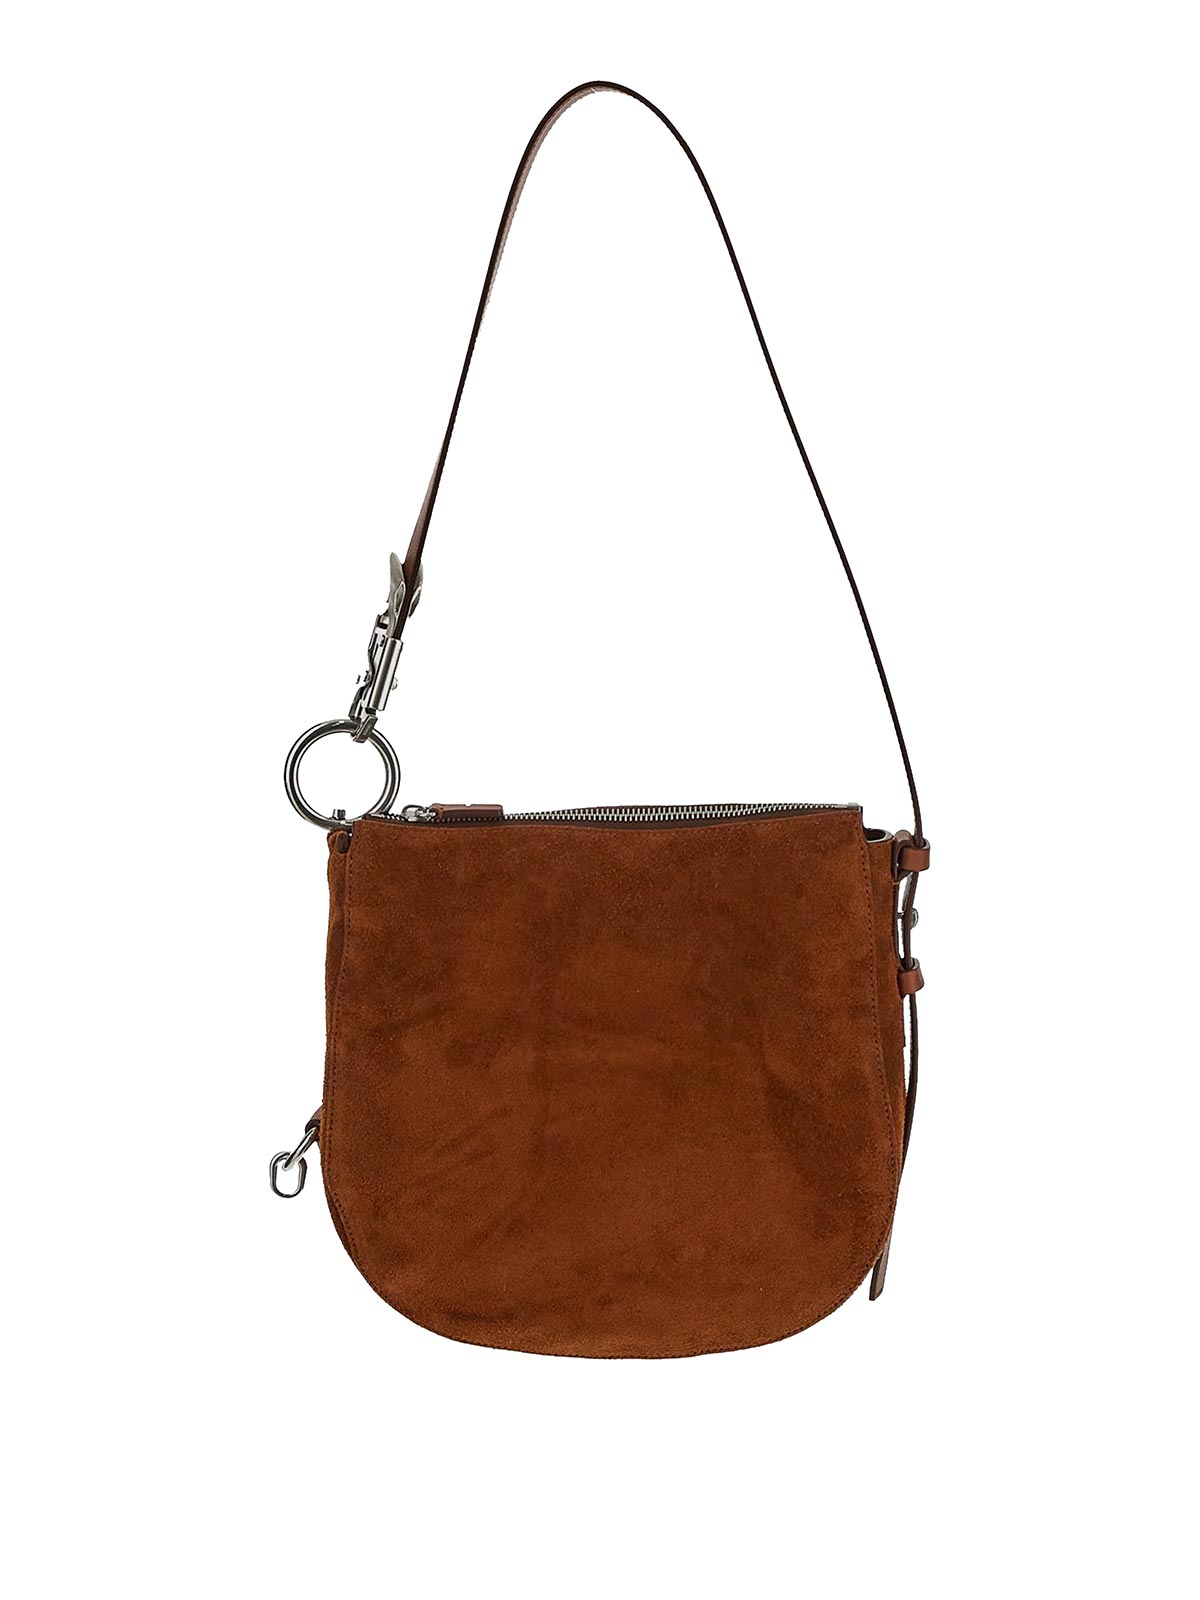 BURBERRY SHOULDER BAG IN BRUSHED BROWN WITH MAXI HOOK